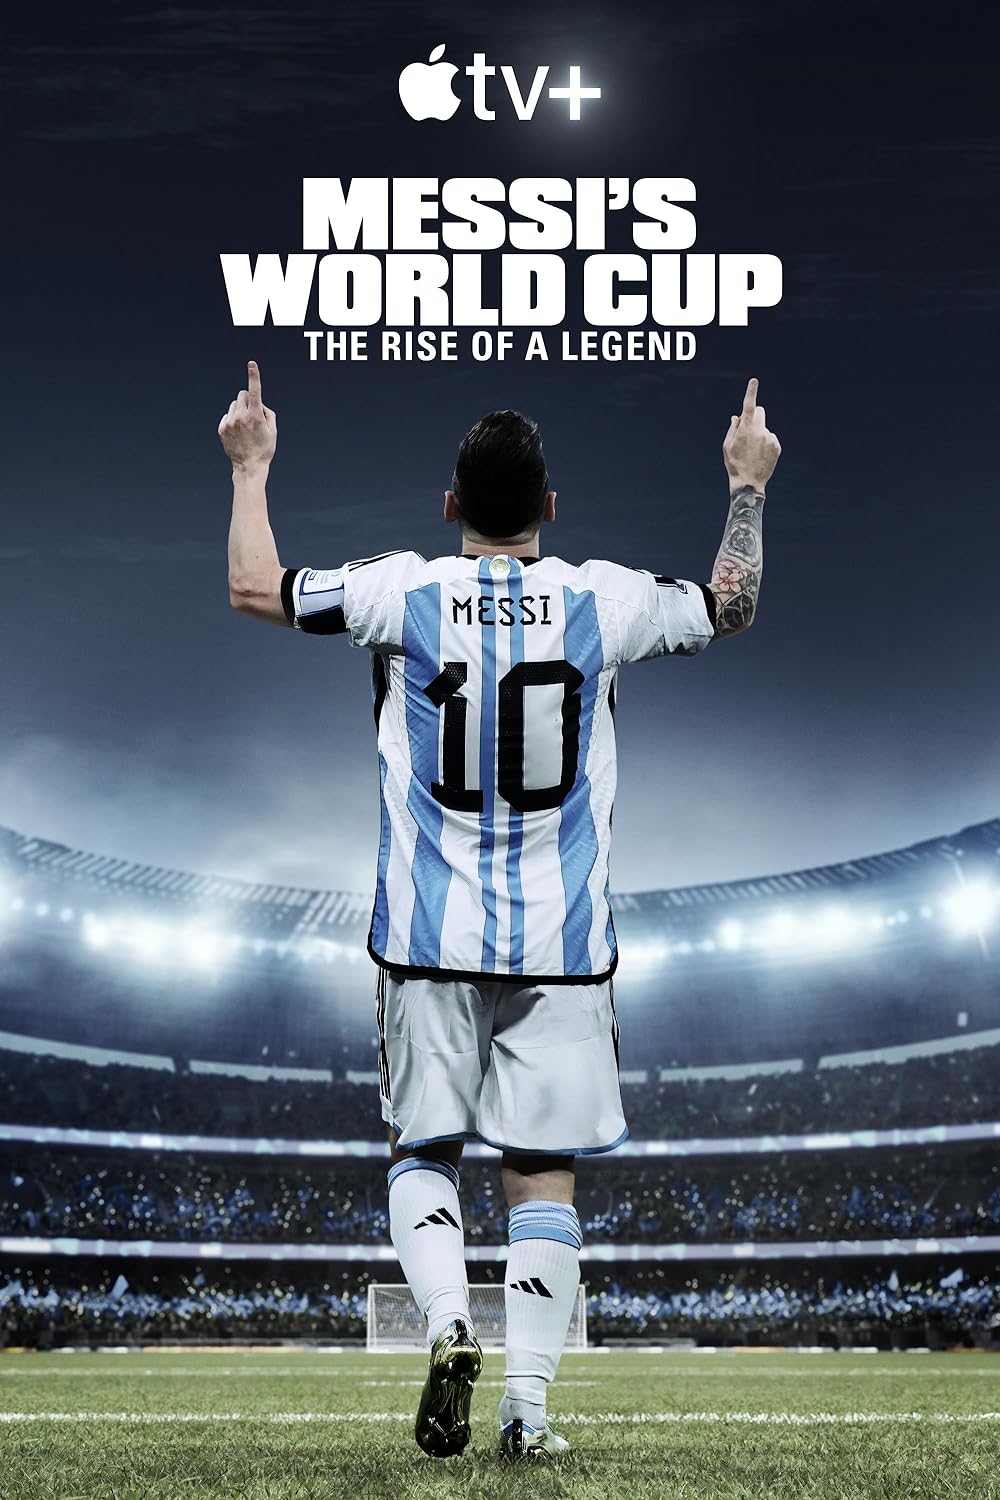 Messi’s World Cup: The Rise of a Legend (February 21) - Streaming on Apple TV+A captivating four-episode documentary series, 'The Rise of a Legend' captures the career of Lionel Messi, highlighting his experiences in five FIFA World Cups and climaxing with his win at Qatar in 2022. With Messi as the narrator, the series presents a personal look into his deepest thoughts, his steadfast commitment to the Argentina national team, and the obstacles he overcame.